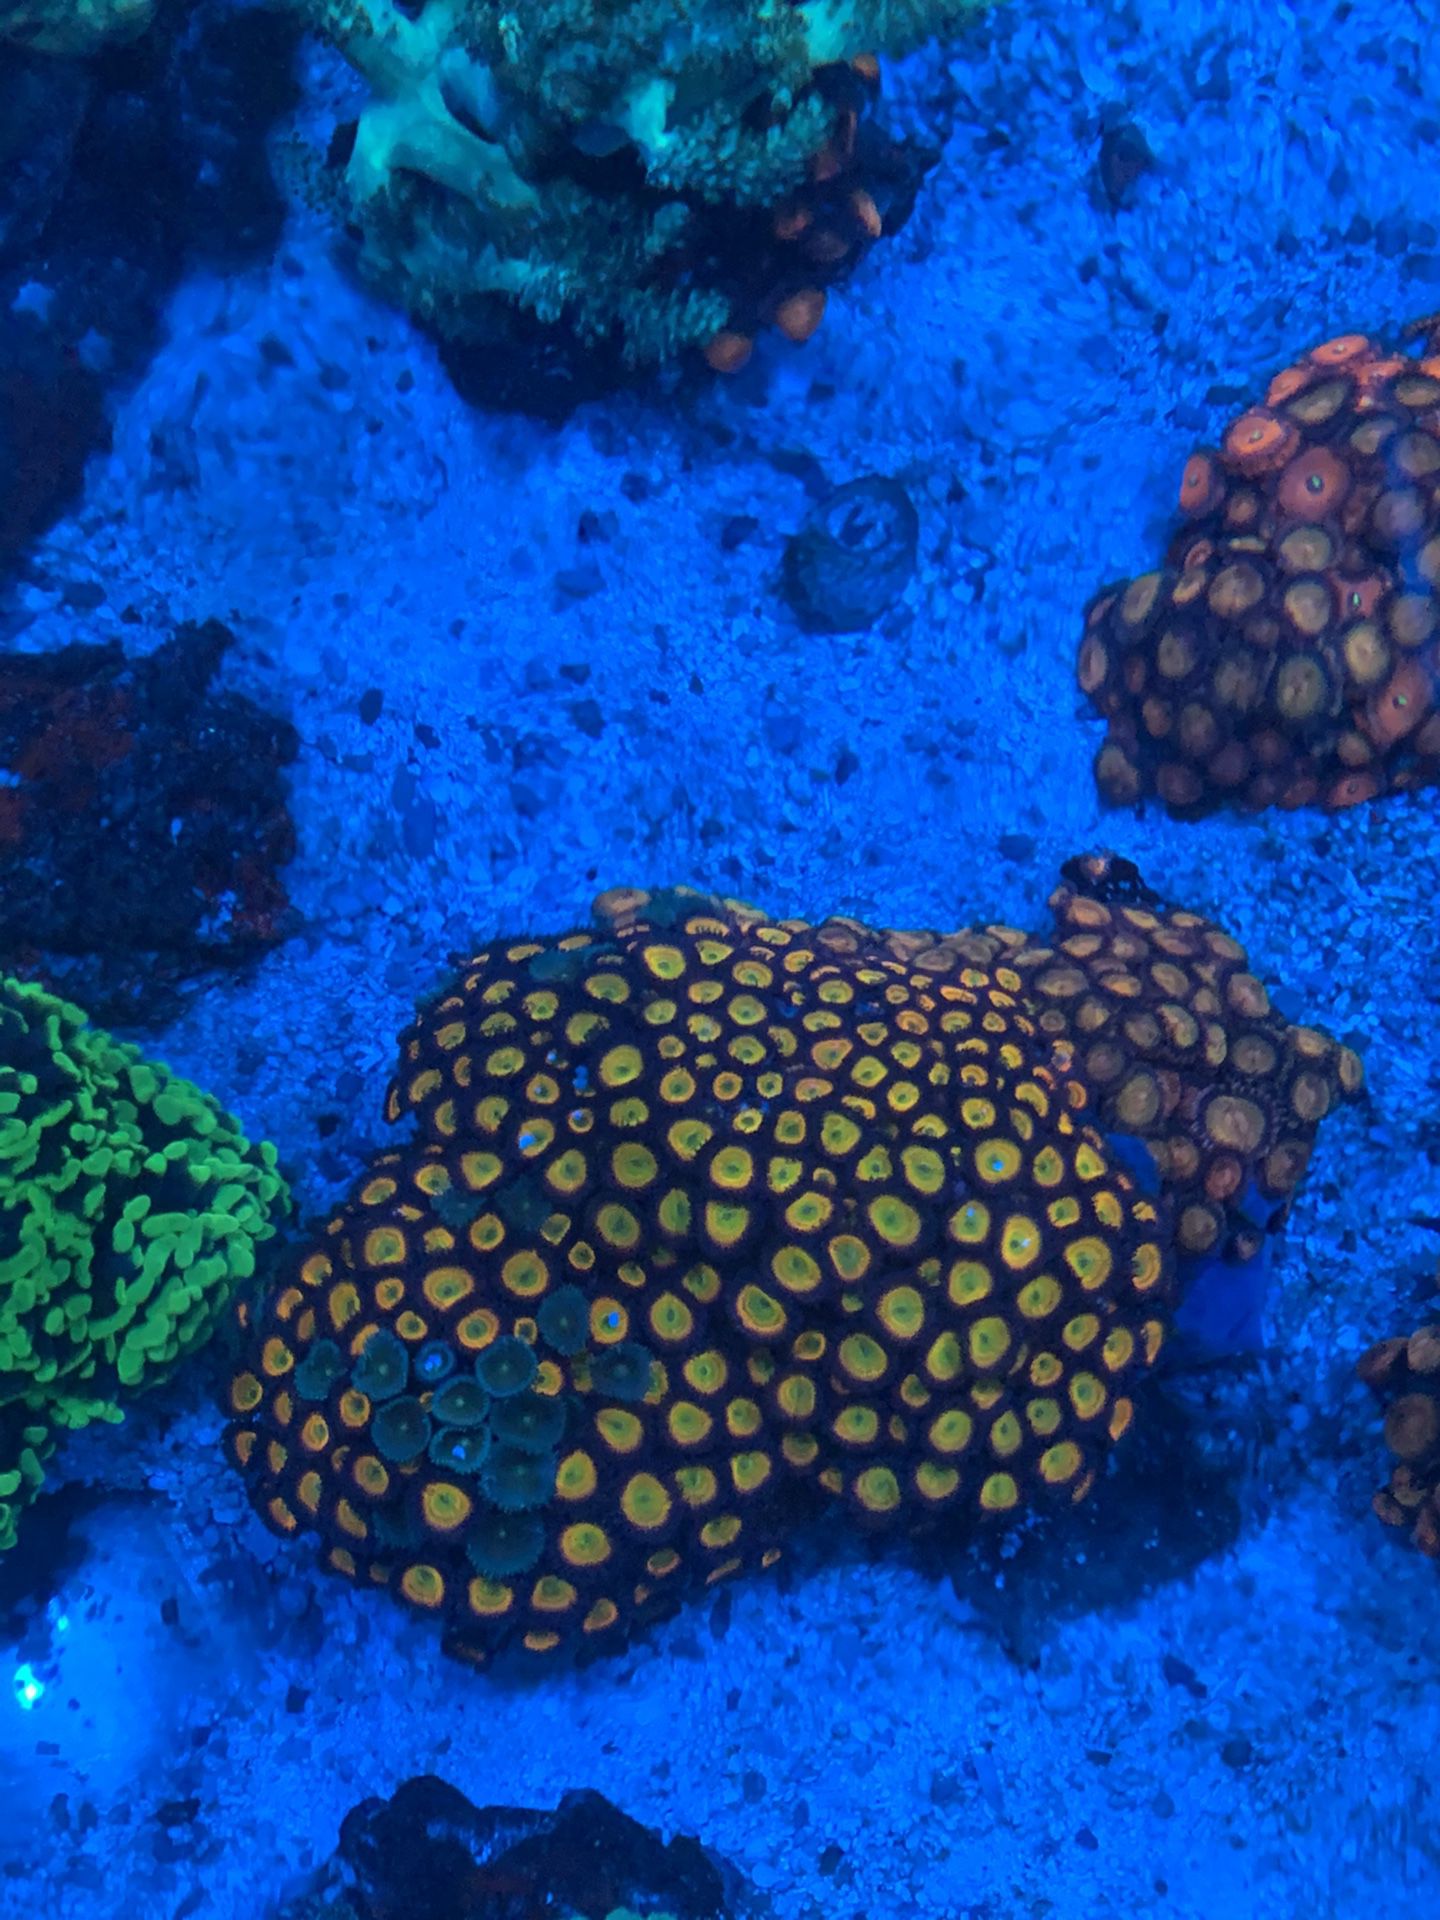 Sunny d’s zoas in a piece of rock